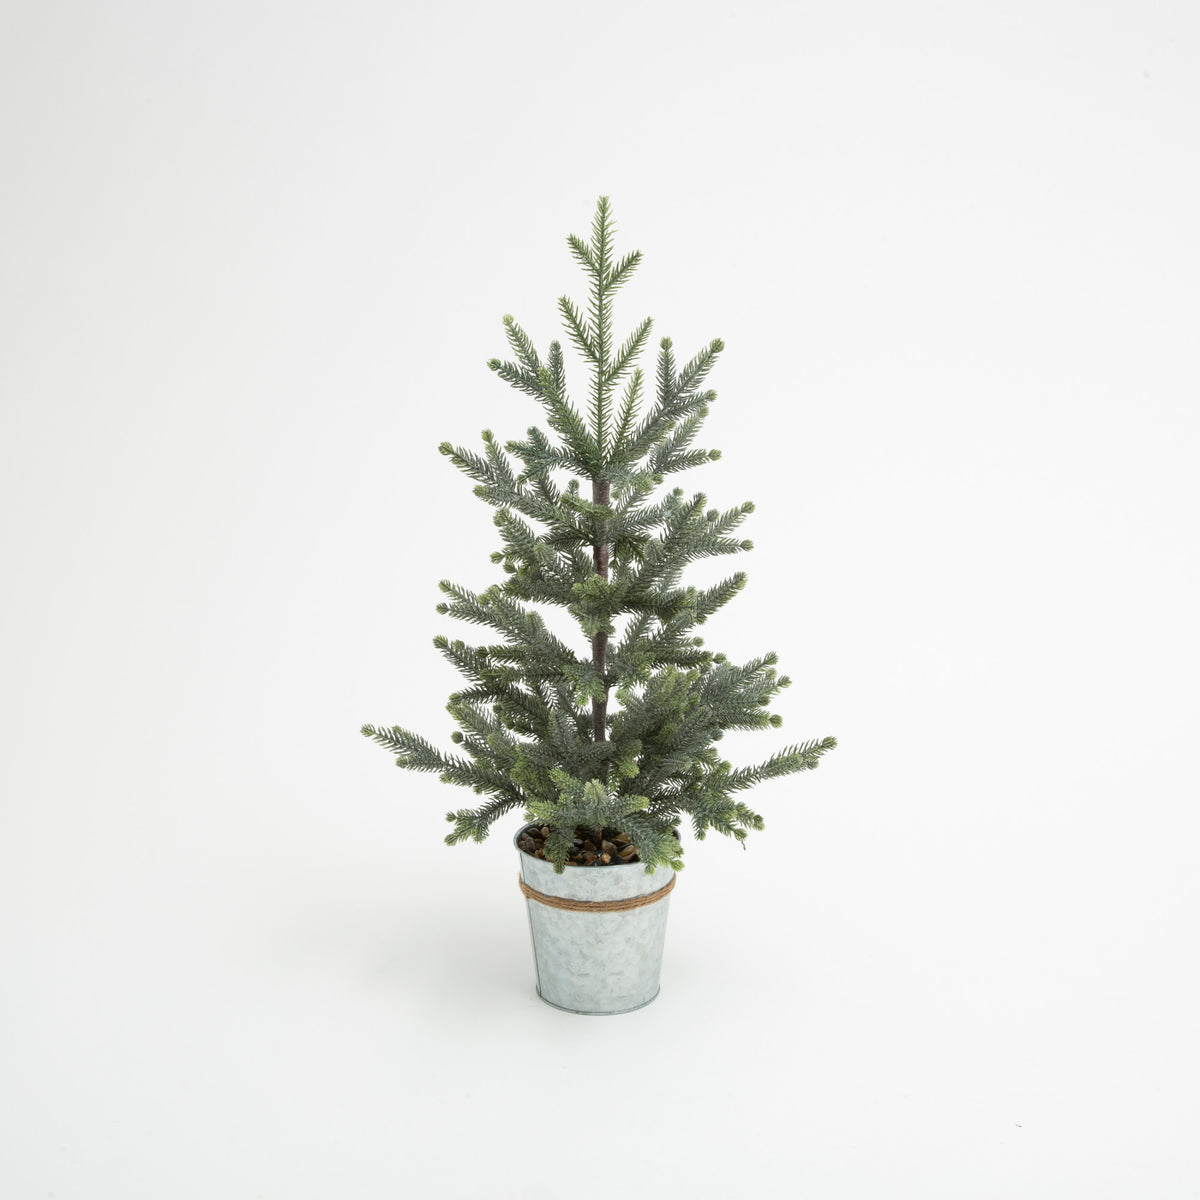 26"H Holiday Pine Tree in a Metal Container